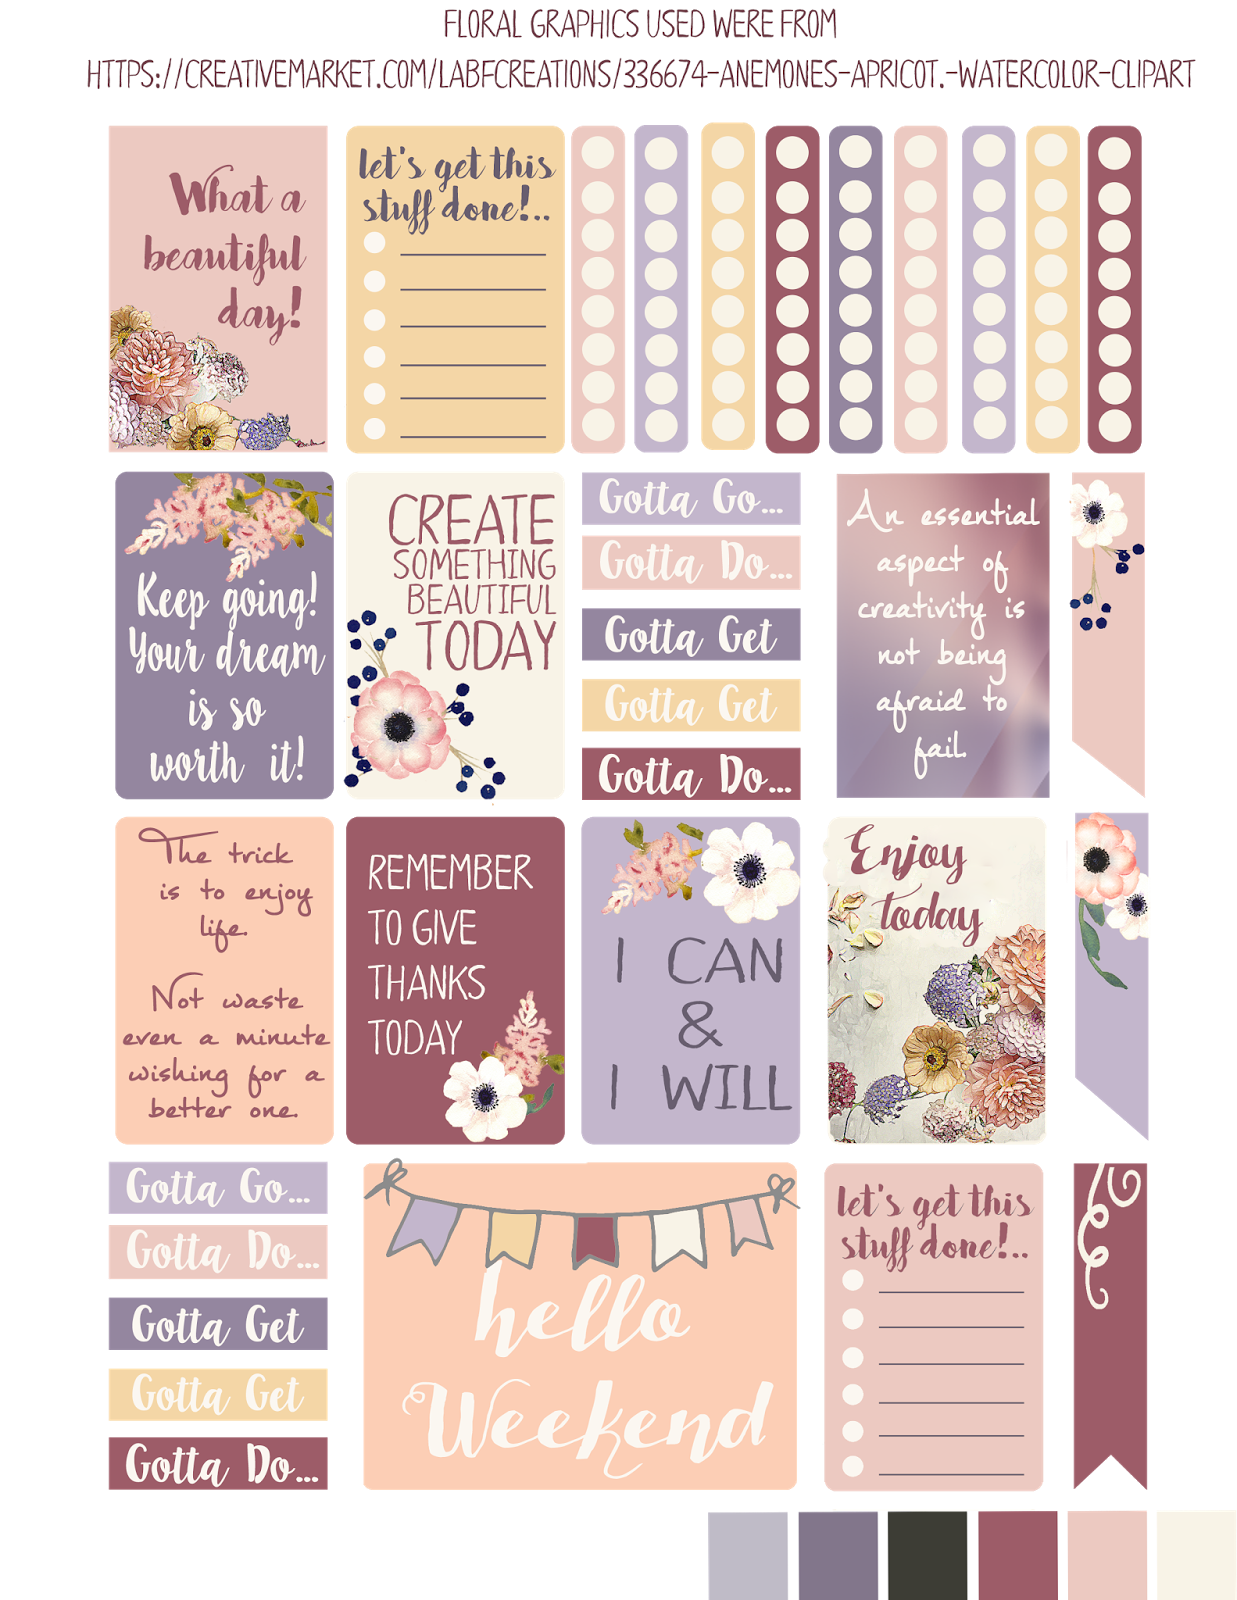 Free Printable Days of the Week Stickers from myplannerenvy.com  Free  printable planner stickers, Free planner stickers, Printable planner